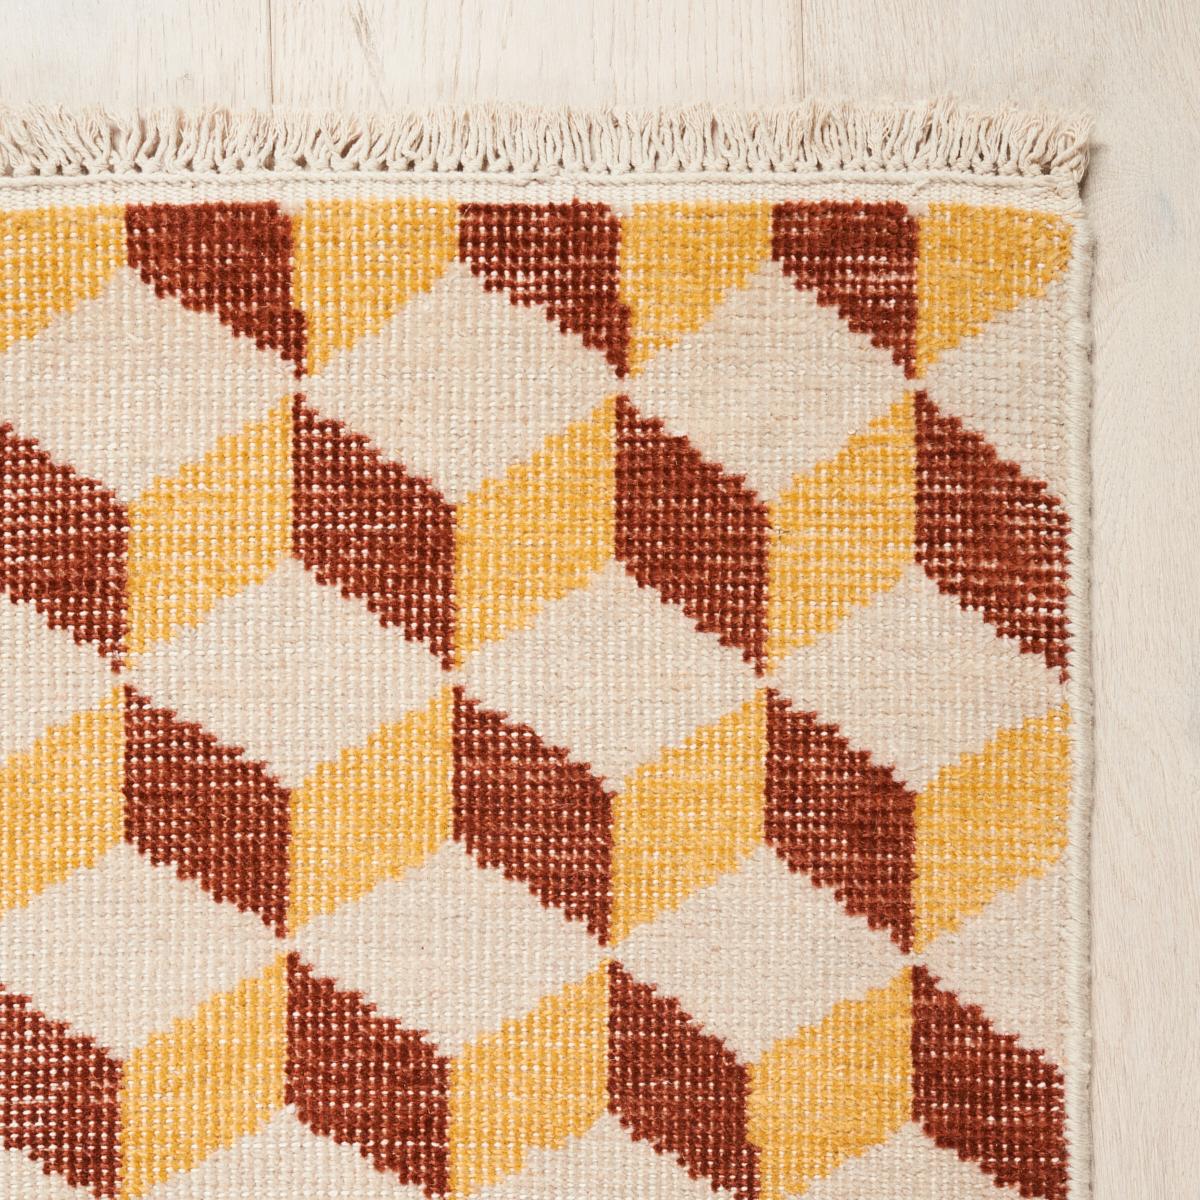 A timeless tumbling-block rug design, Pompeii features a versatile motif that is equally at home in modern and traditional interiors. With its graphic pattern, stylish fringe and soft wool pile, this hand-knotted rug looks as good as it feels.
